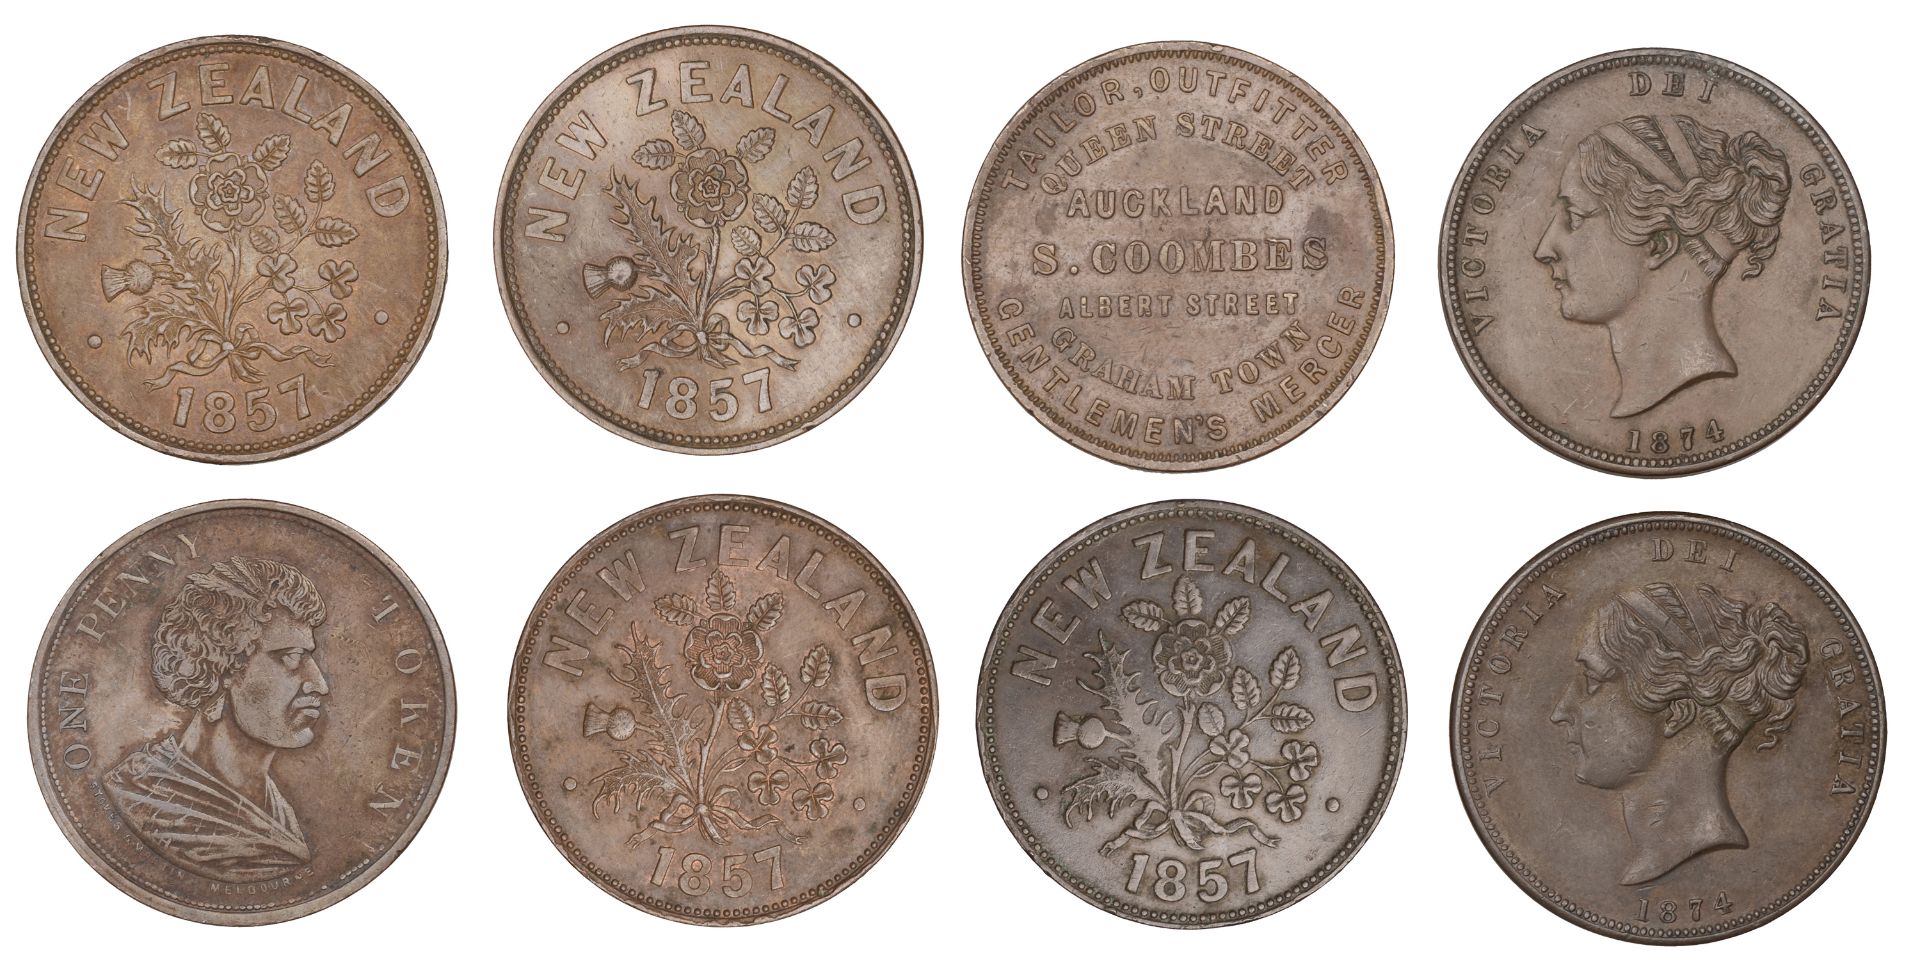 New Zealand, AUCKLAND, Samuel Coombes, Penny, undated (G 48a; A 77); M. Somerville, Pennies... - Image 2 of 2